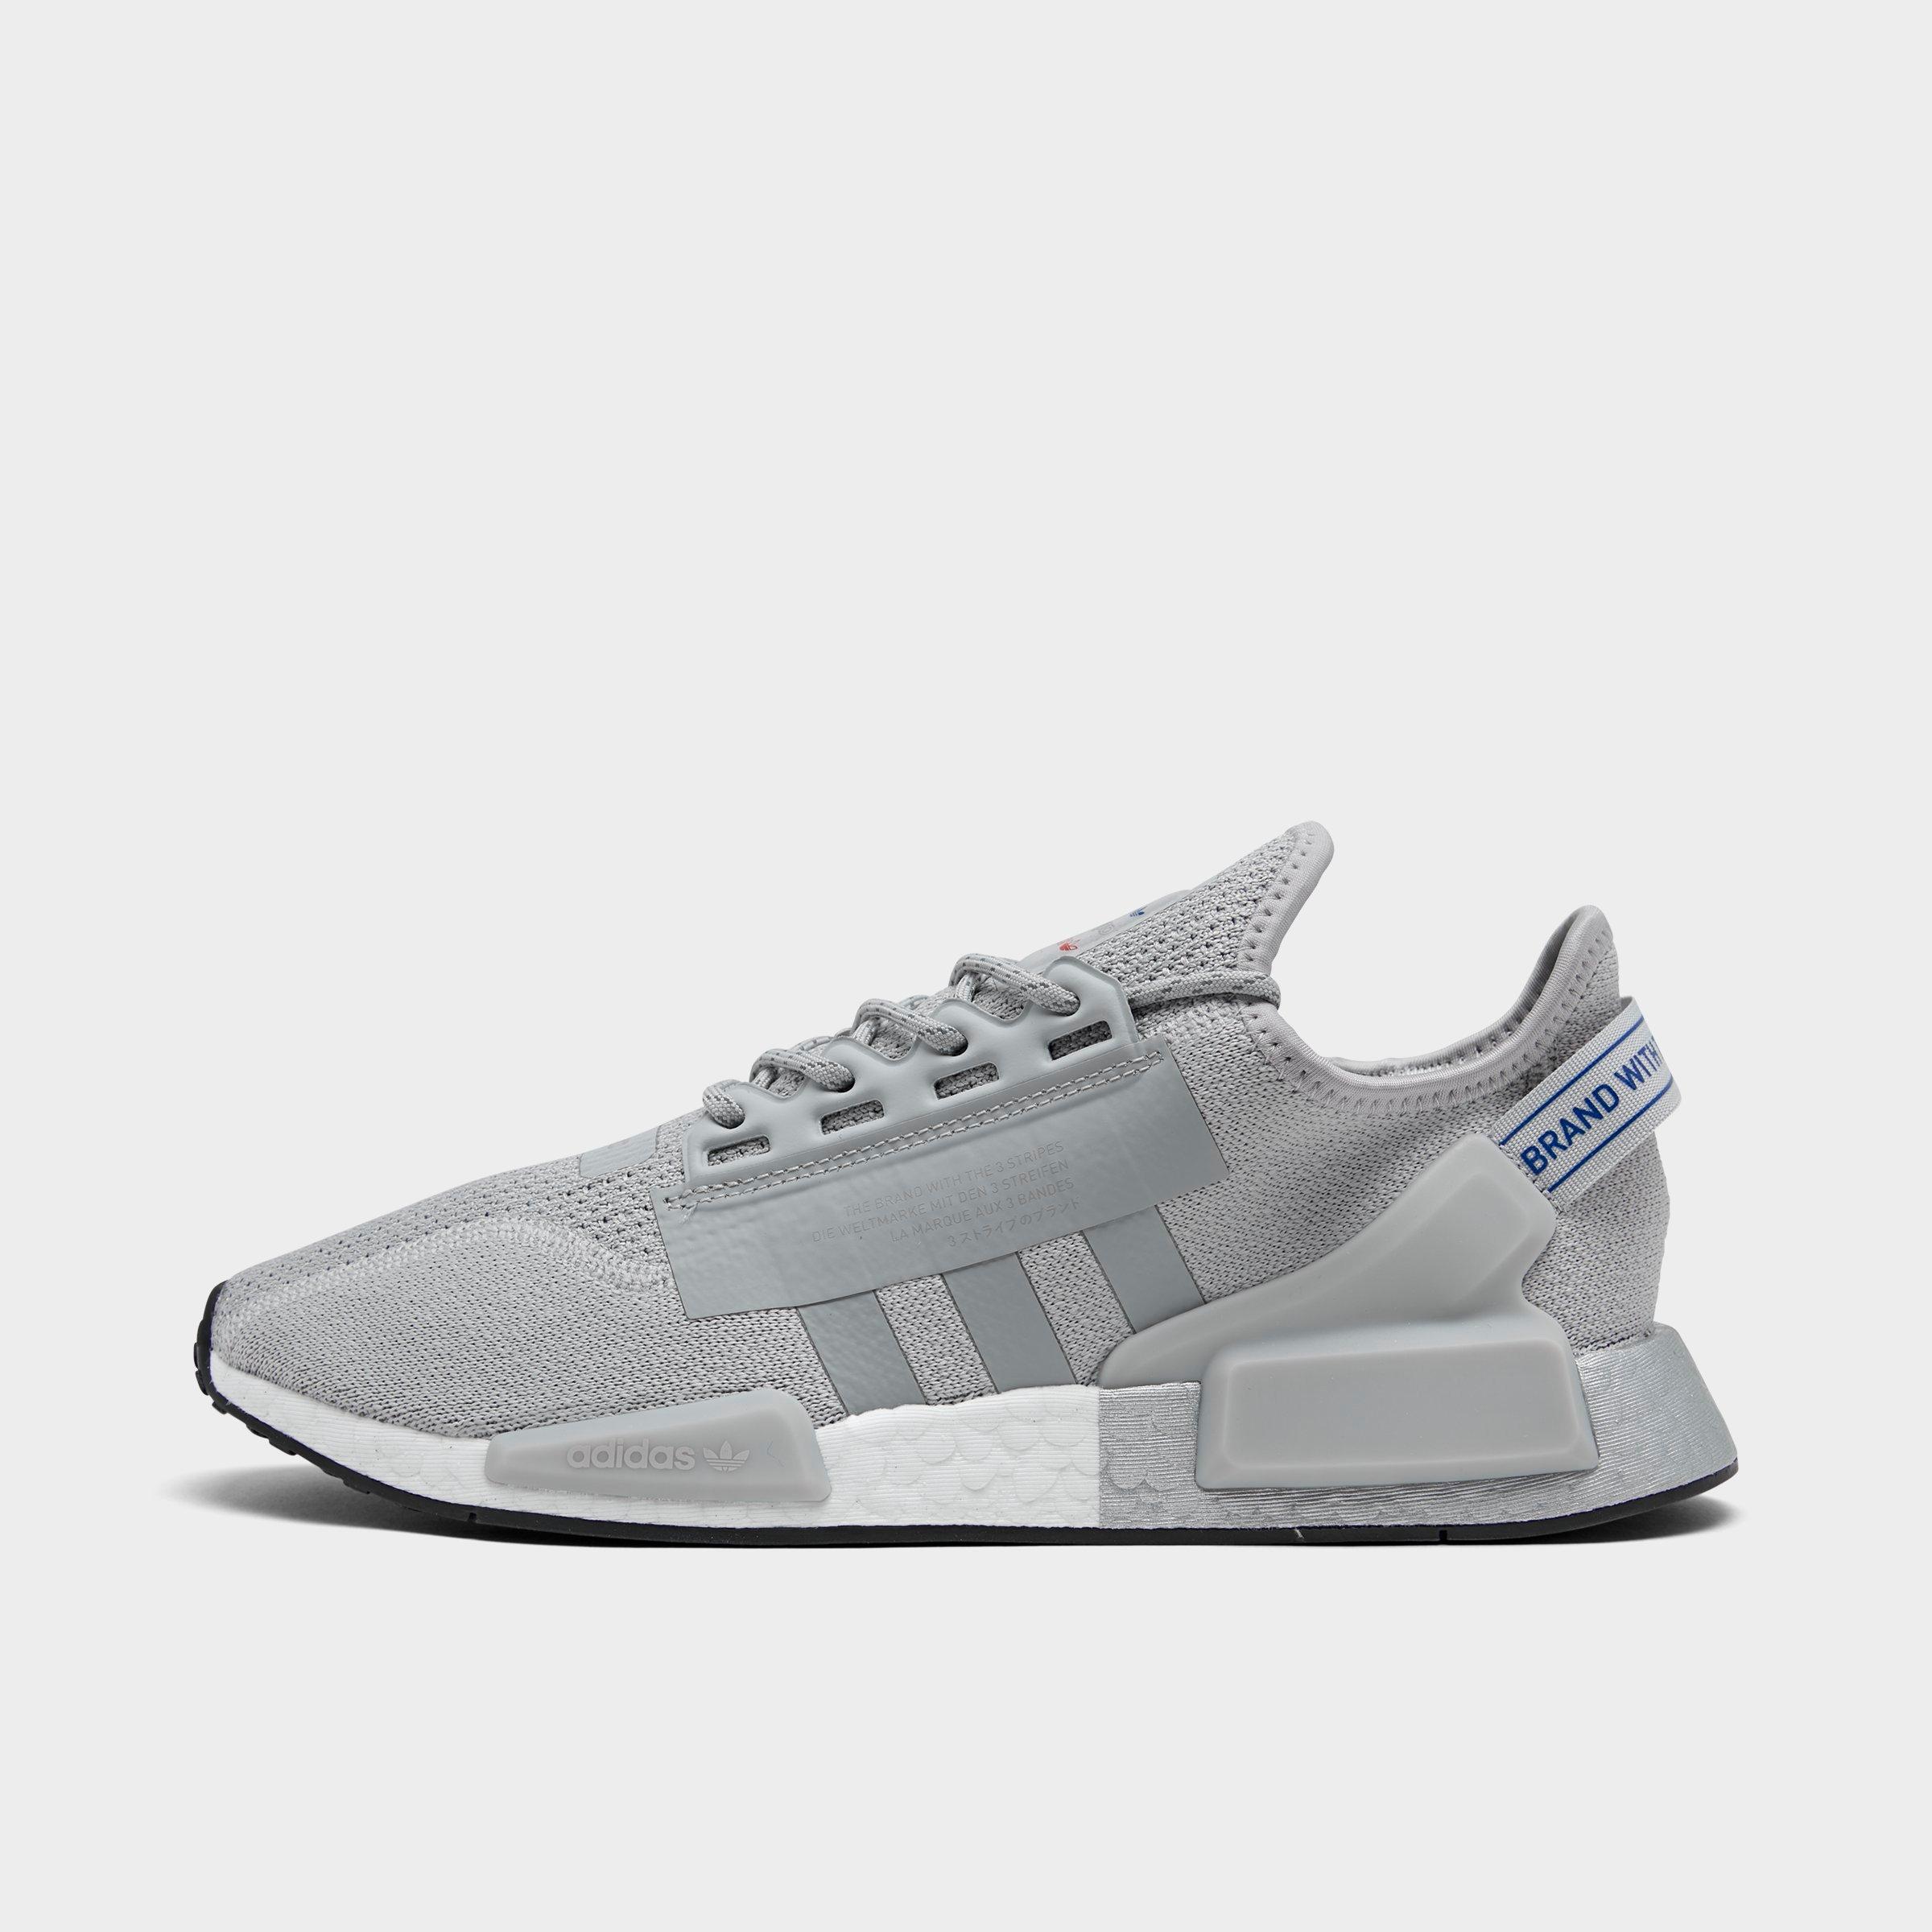 165 Best NMD R1 images Nmd r1 Nmd Adidas nmd